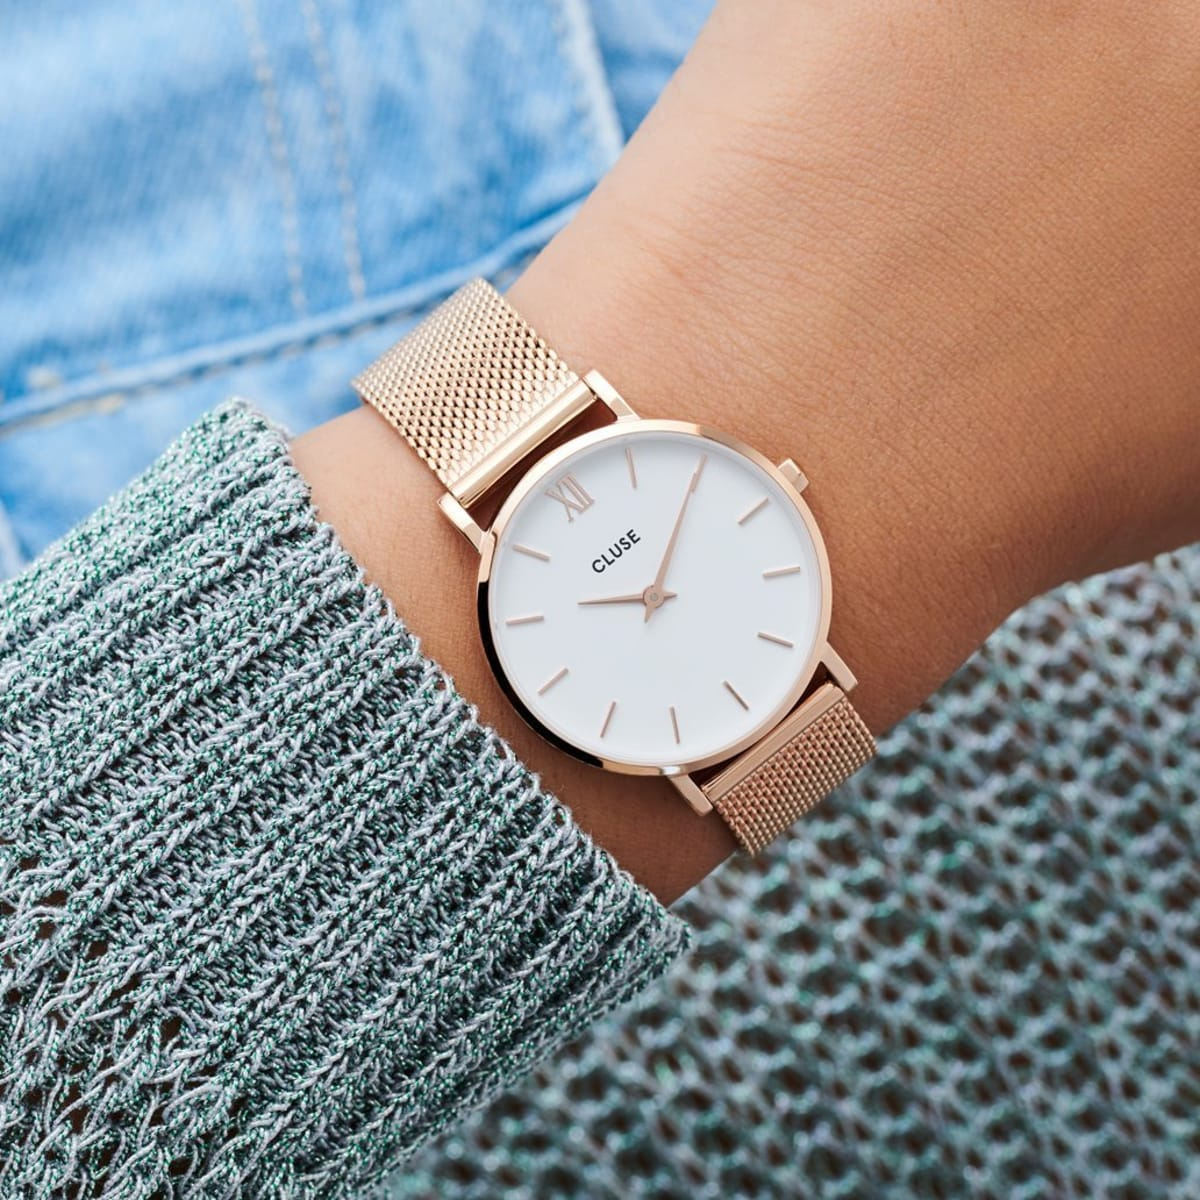 Cluse Minuit Mesh White and Rose Gold Colour (CW0101203001)